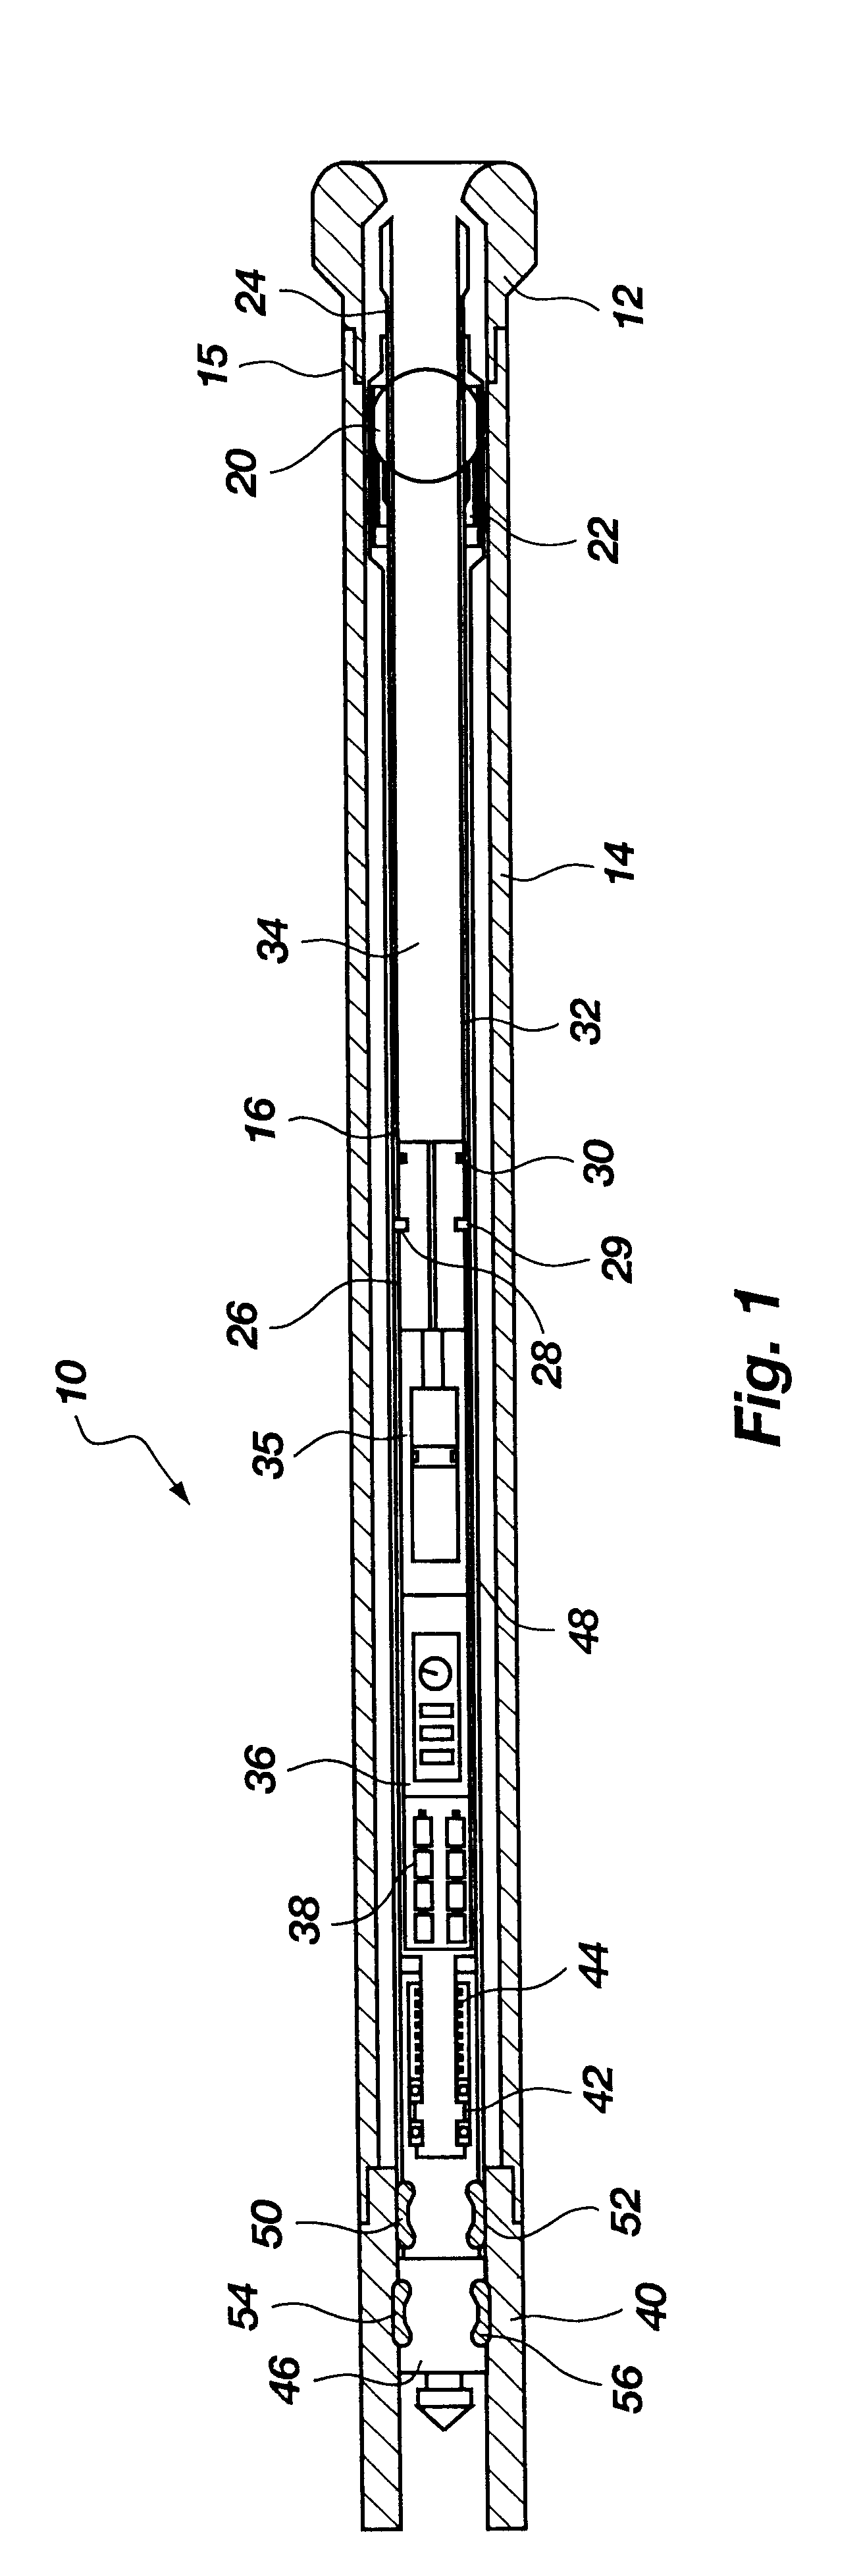 Apparatus for recovering core samples under pressure